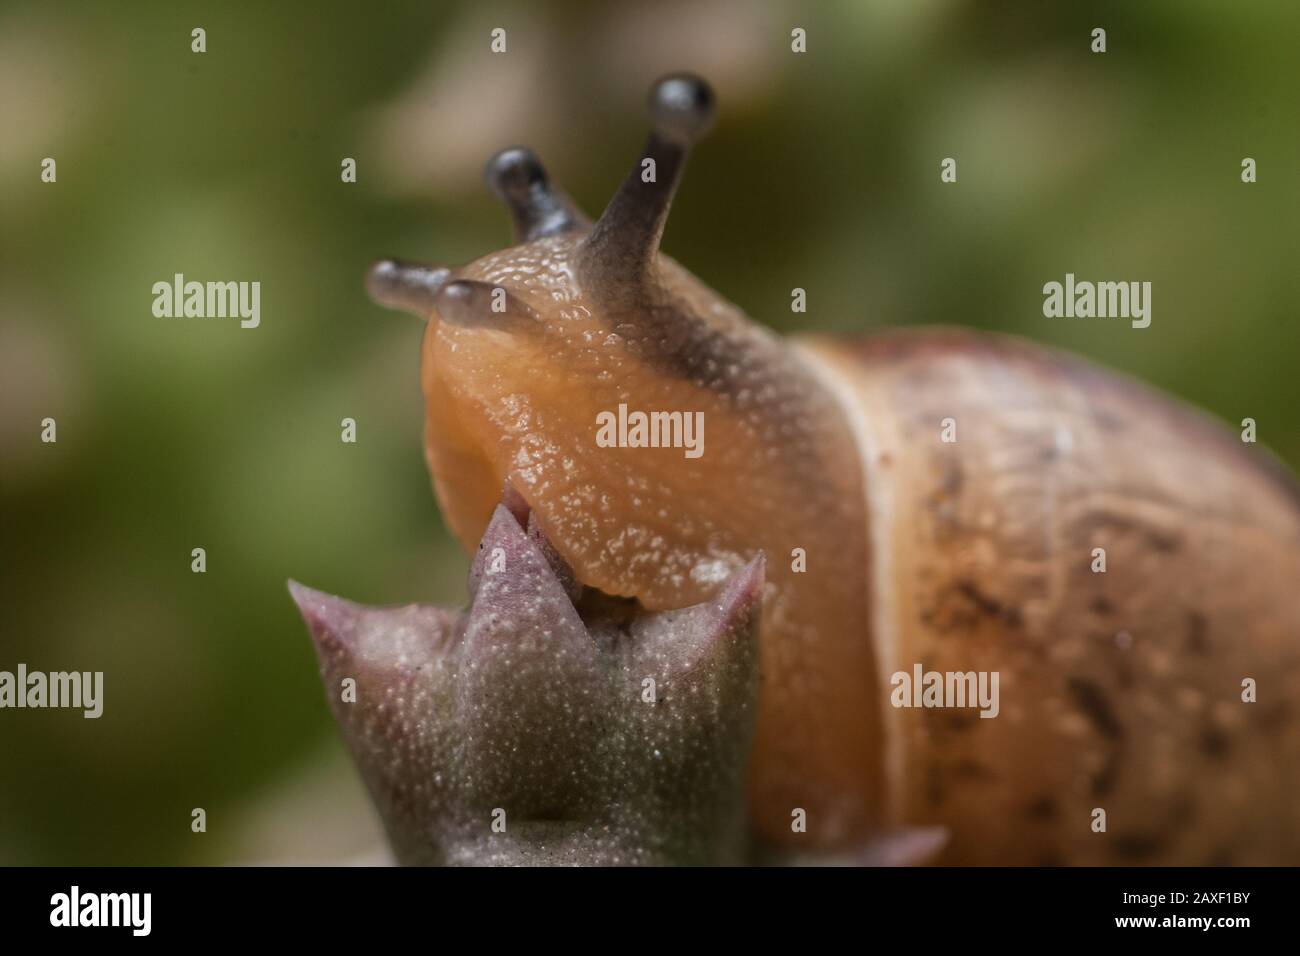 Details of a snail from a garden stretching itself out of the shell Stock Photo